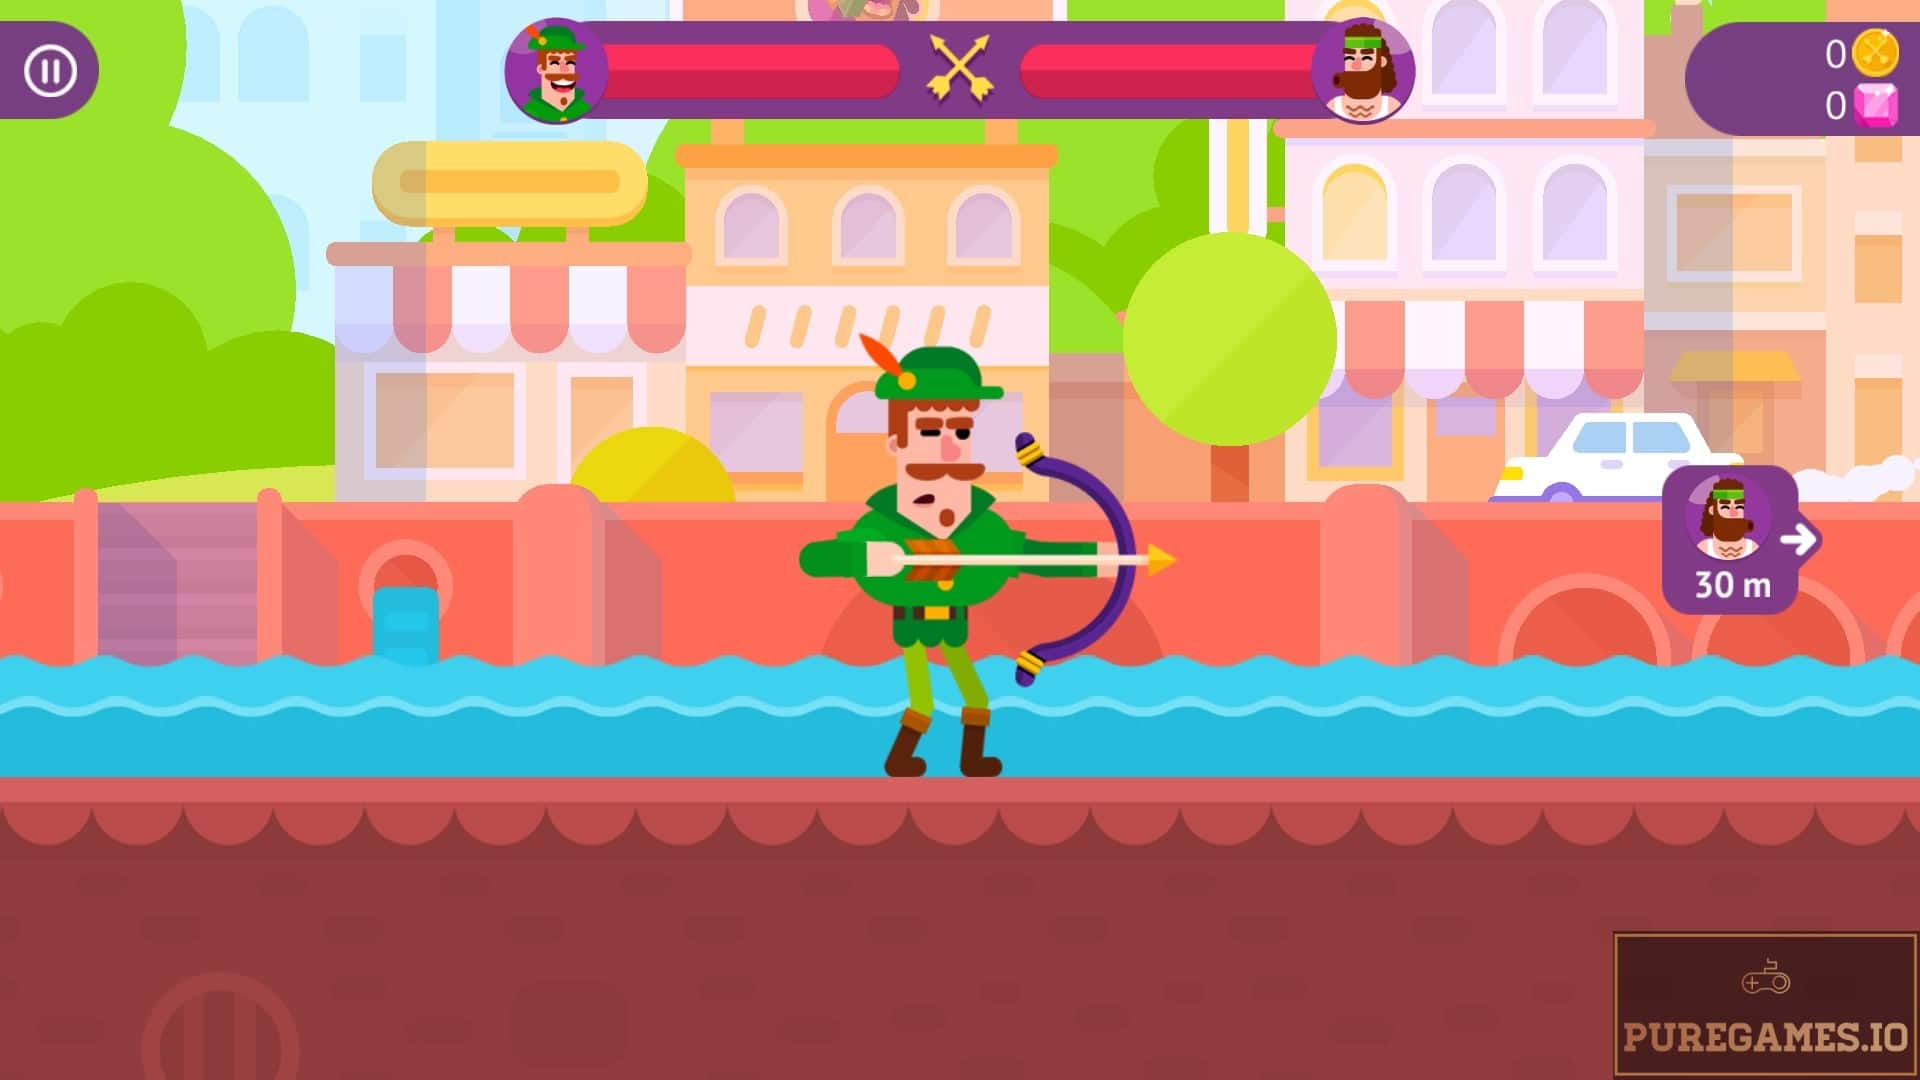 bowmasters apk download